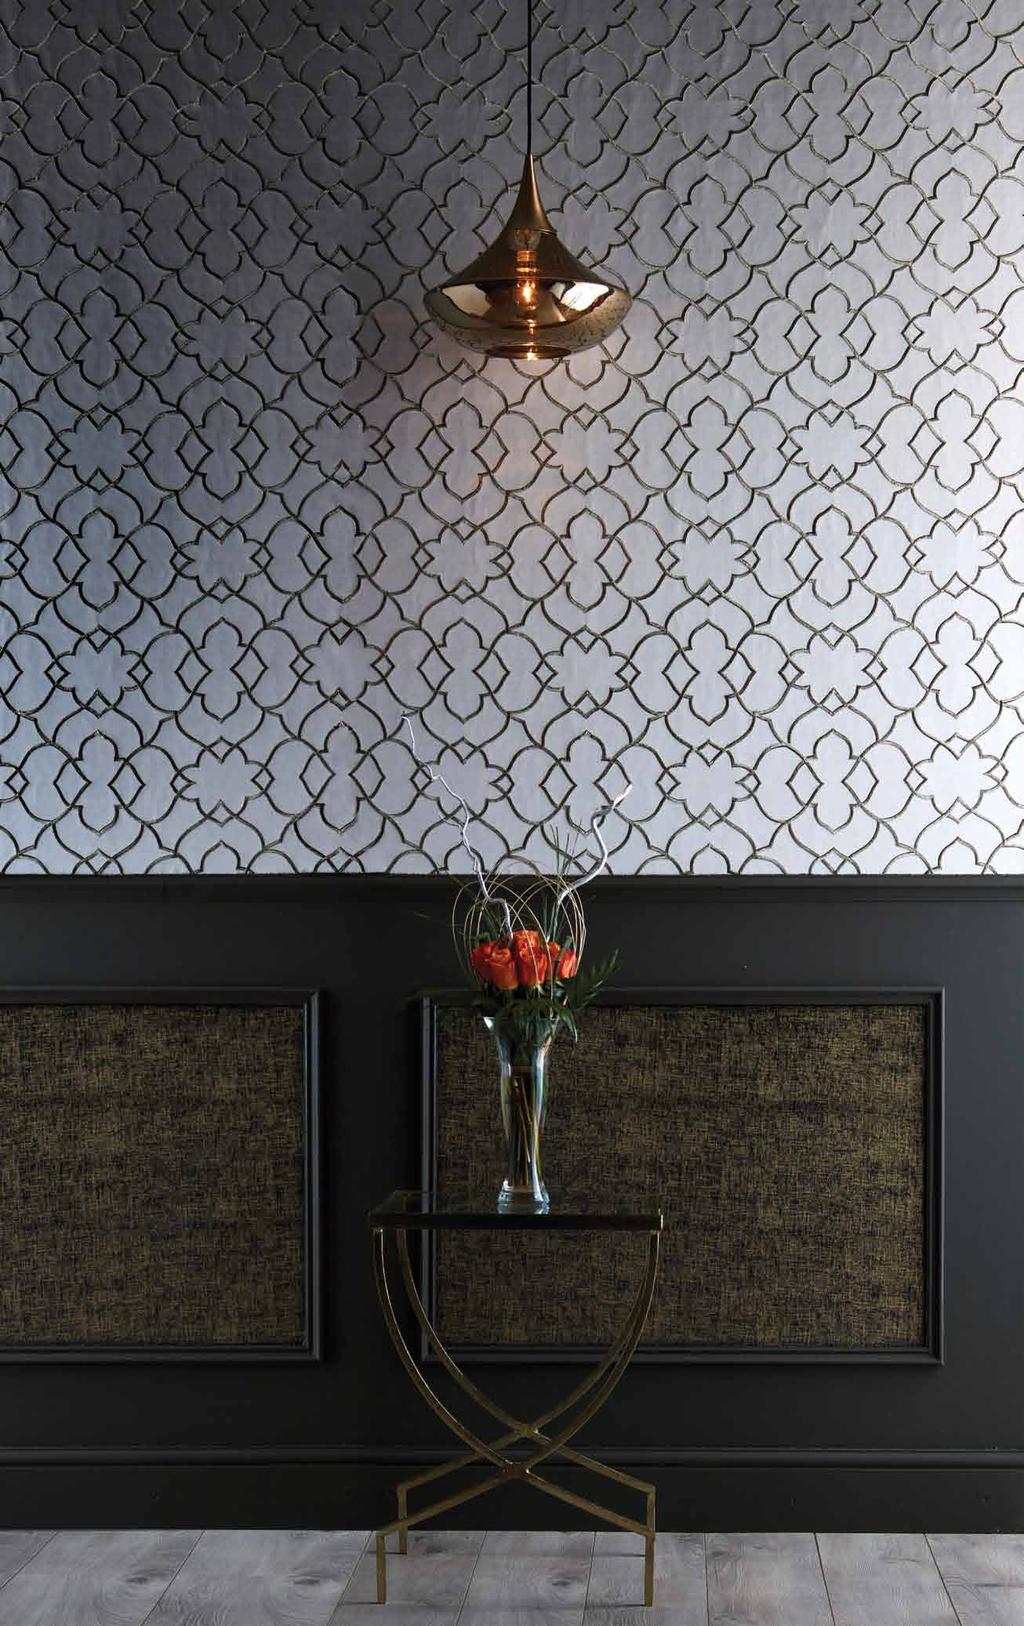 Embroidered Satin & Wallcovering Lotus Inspired by a